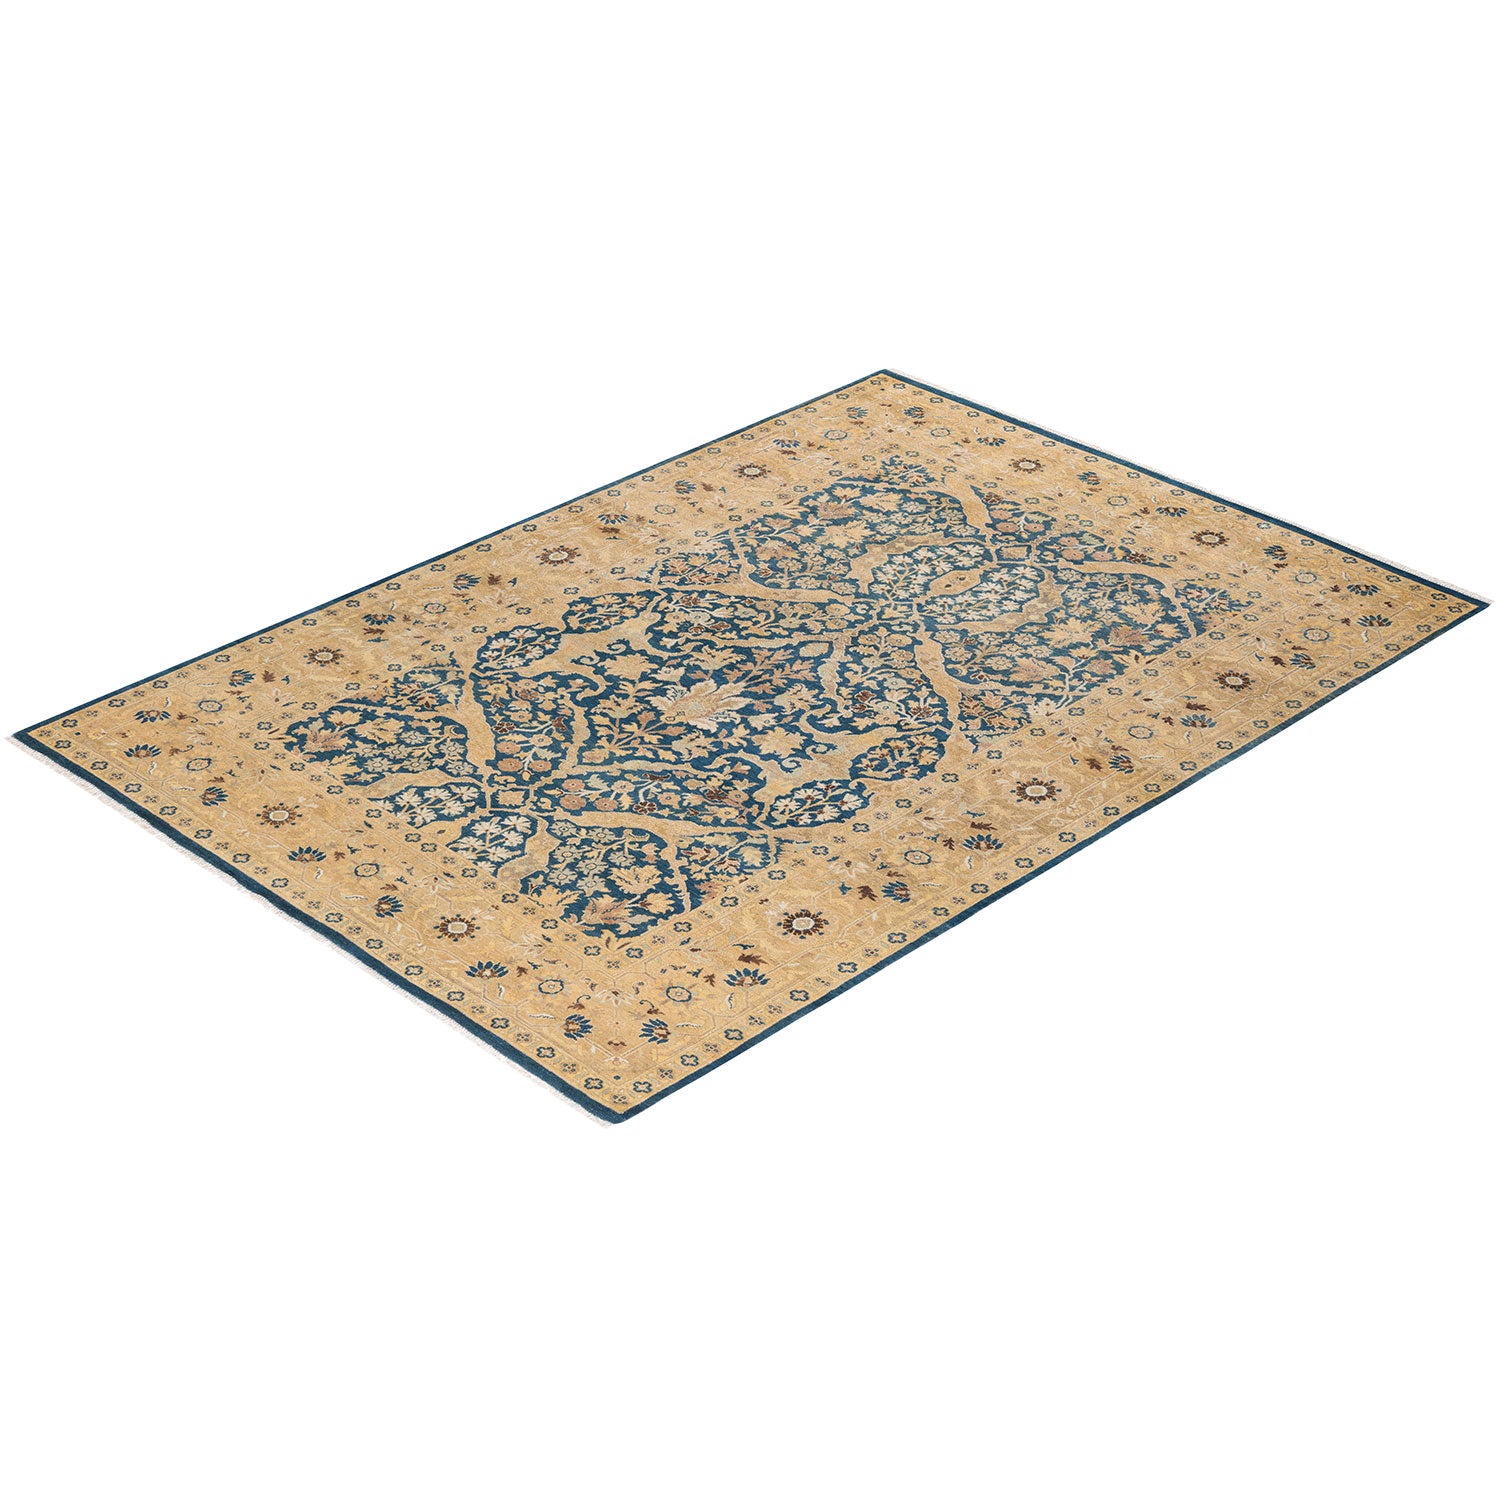 Rectangular area rug with ornate Persian design in shades of blue on beige background